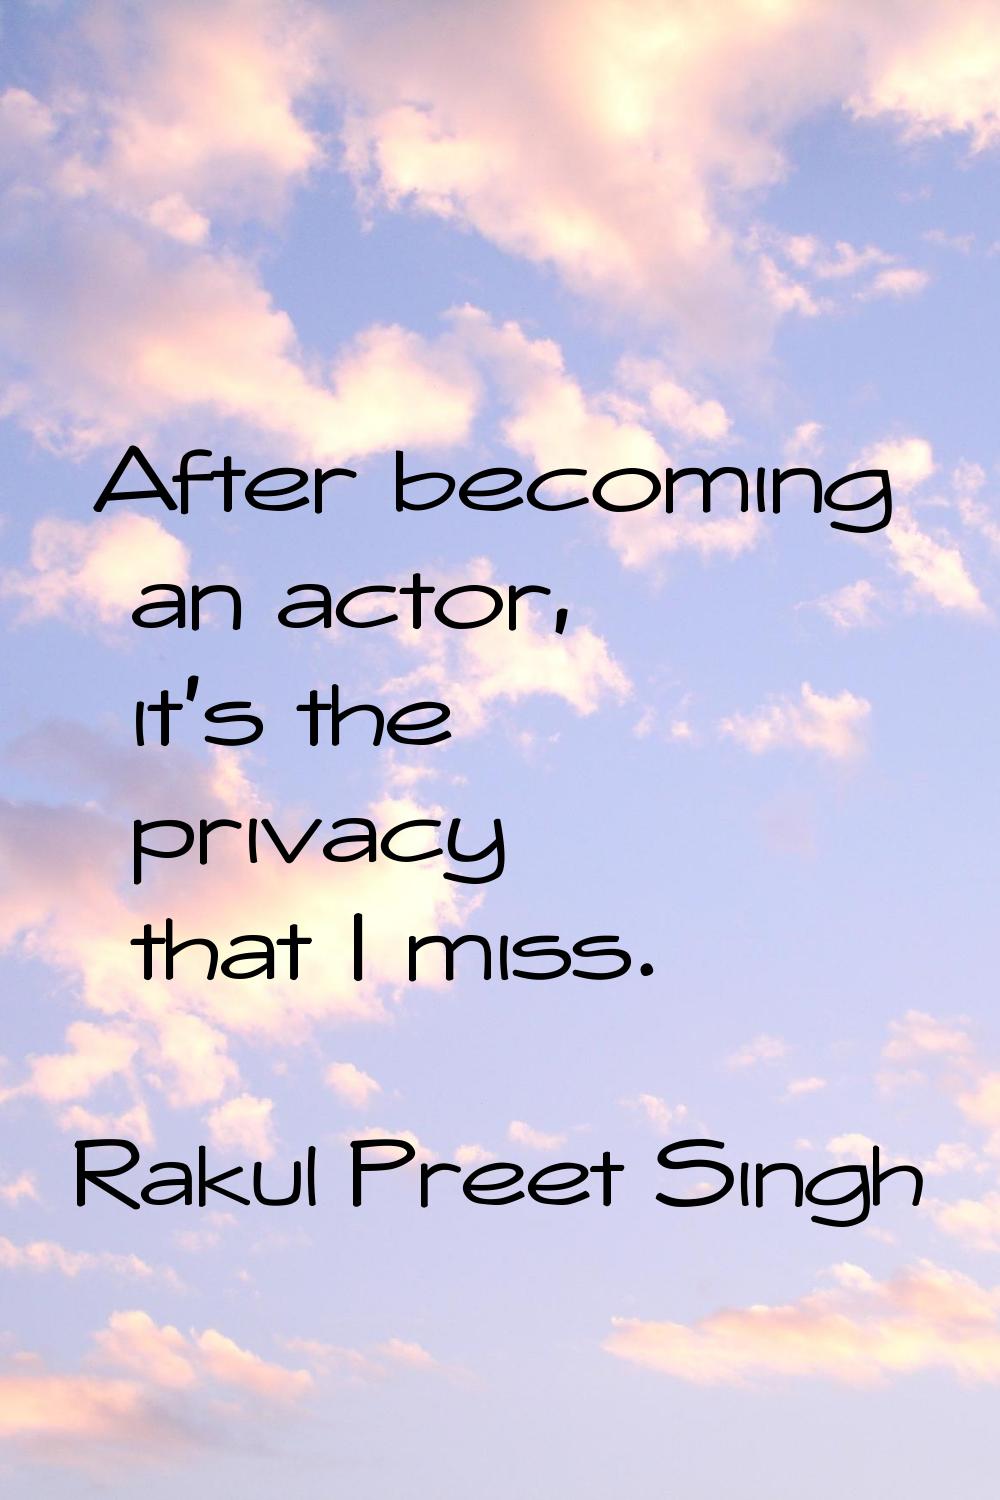 After becoming an actor, it's the privacy that I miss.